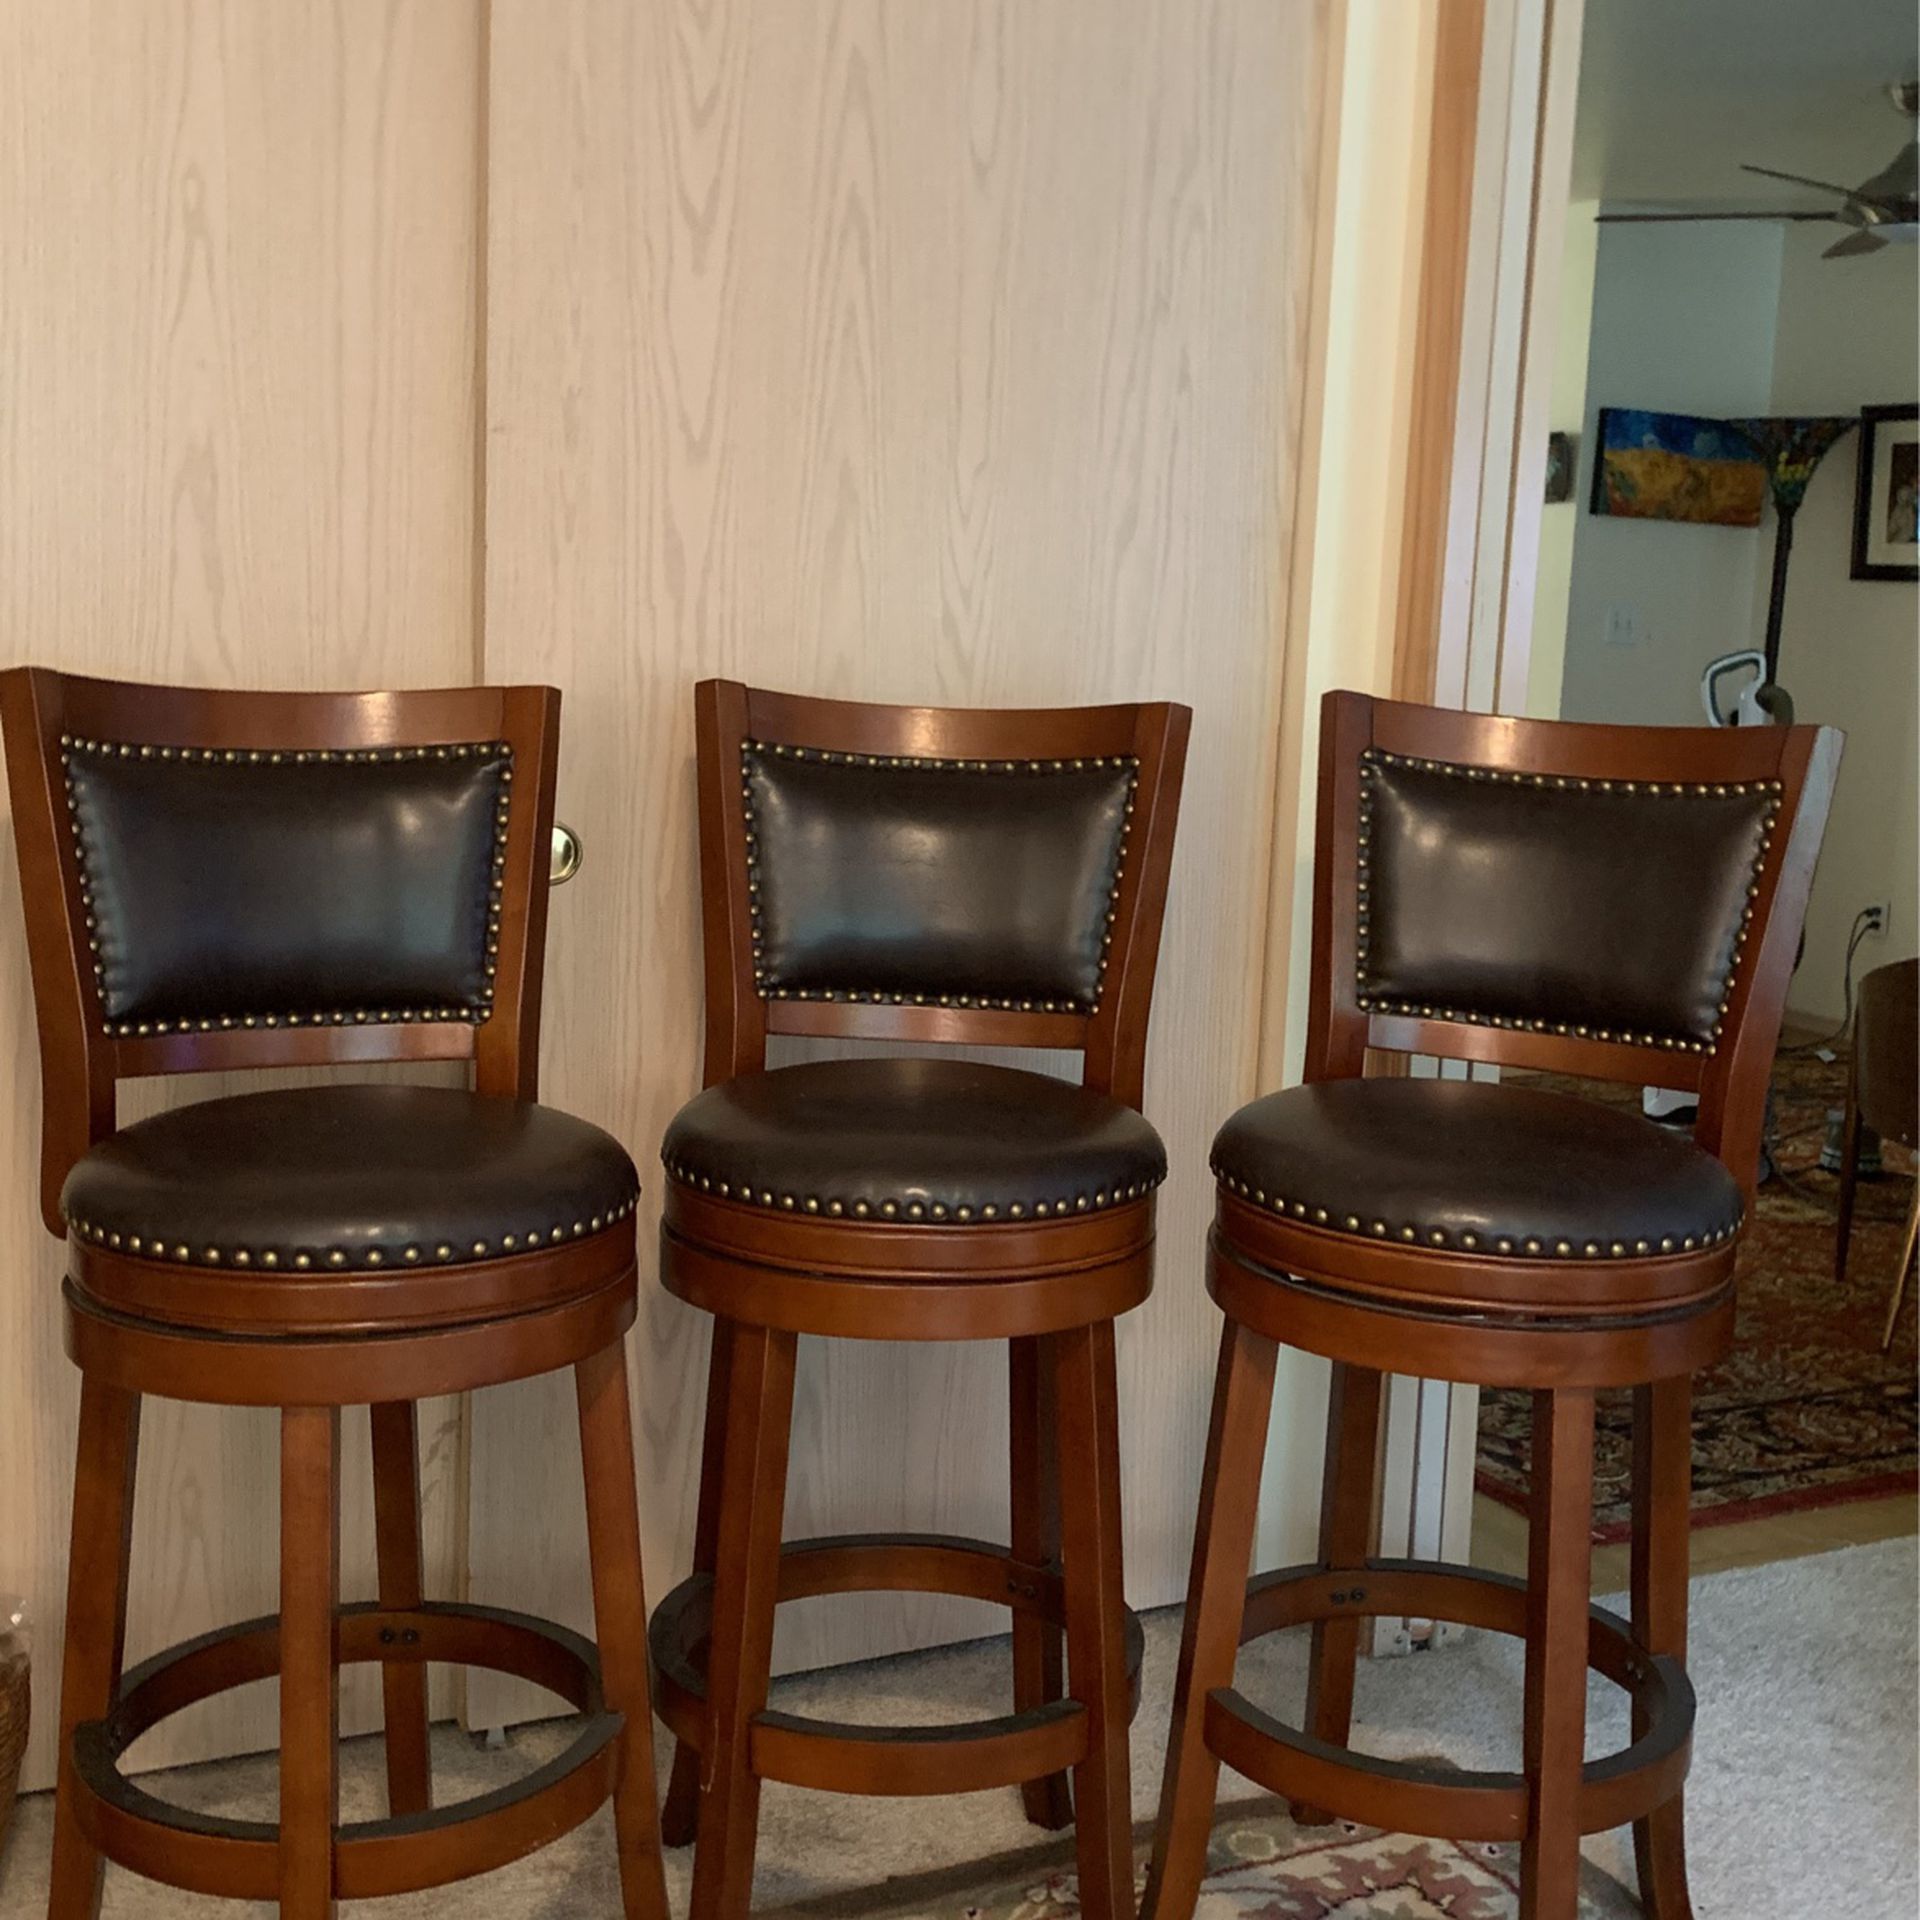 Swivel Bar Stools Black Leather+Cherry Wood+Brass Tacks . Floor to Seat 29”. Floor to top Of The Back 42”.